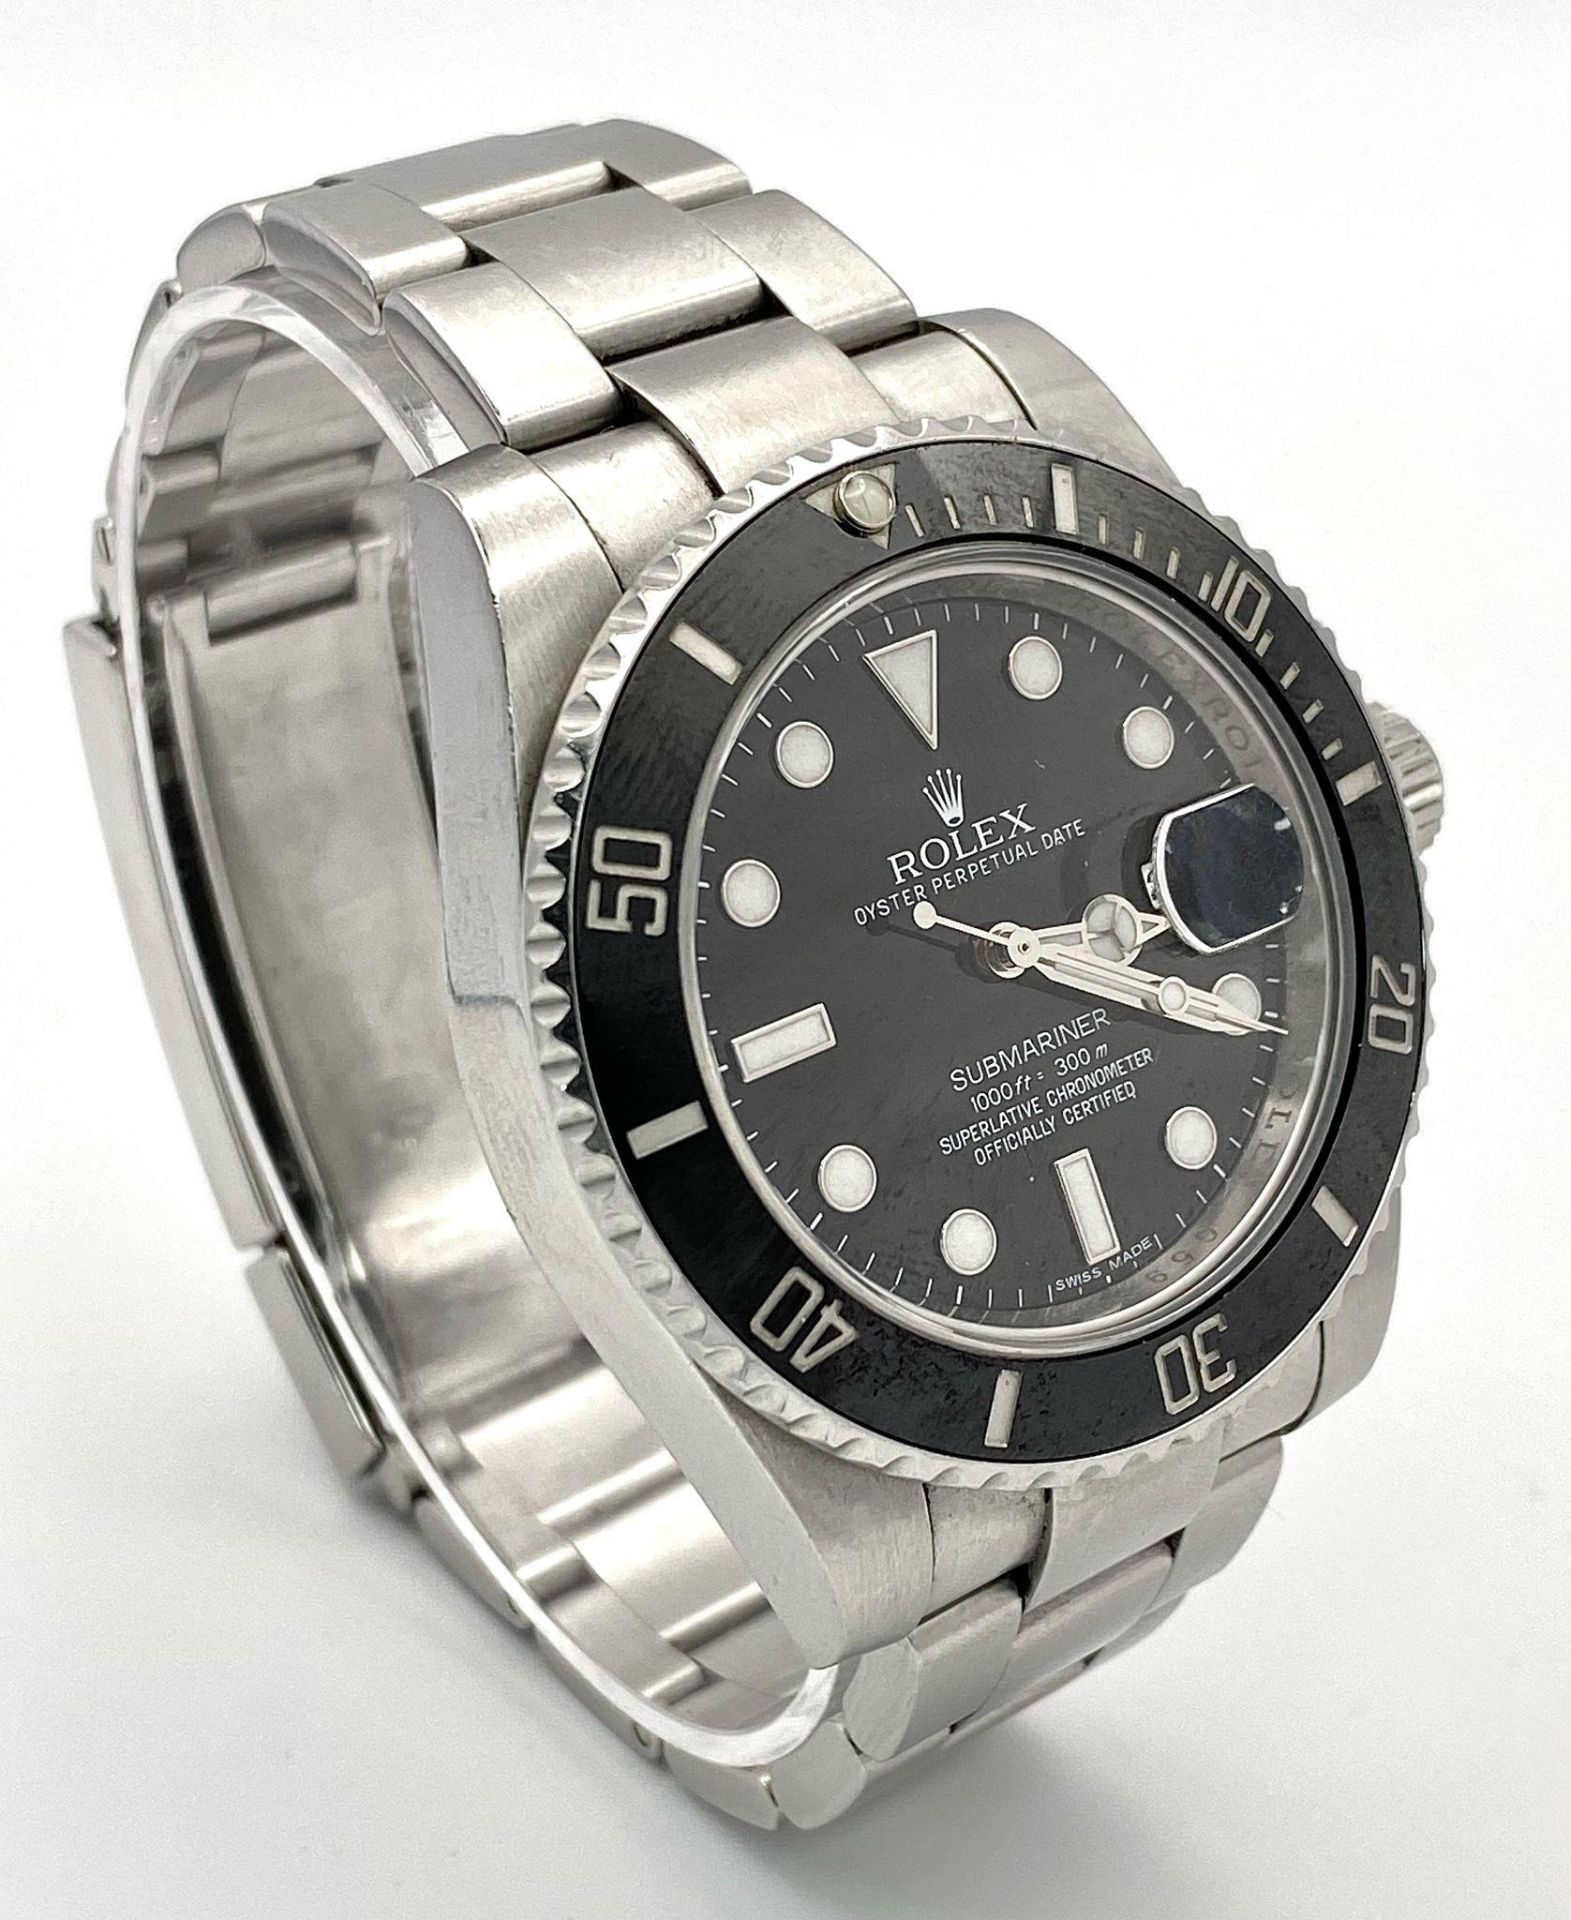 A Rolex Submariner Date Automatic Gents Watch. Stainless steel bracelet and case - 41mm. Black - Image 3 of 11